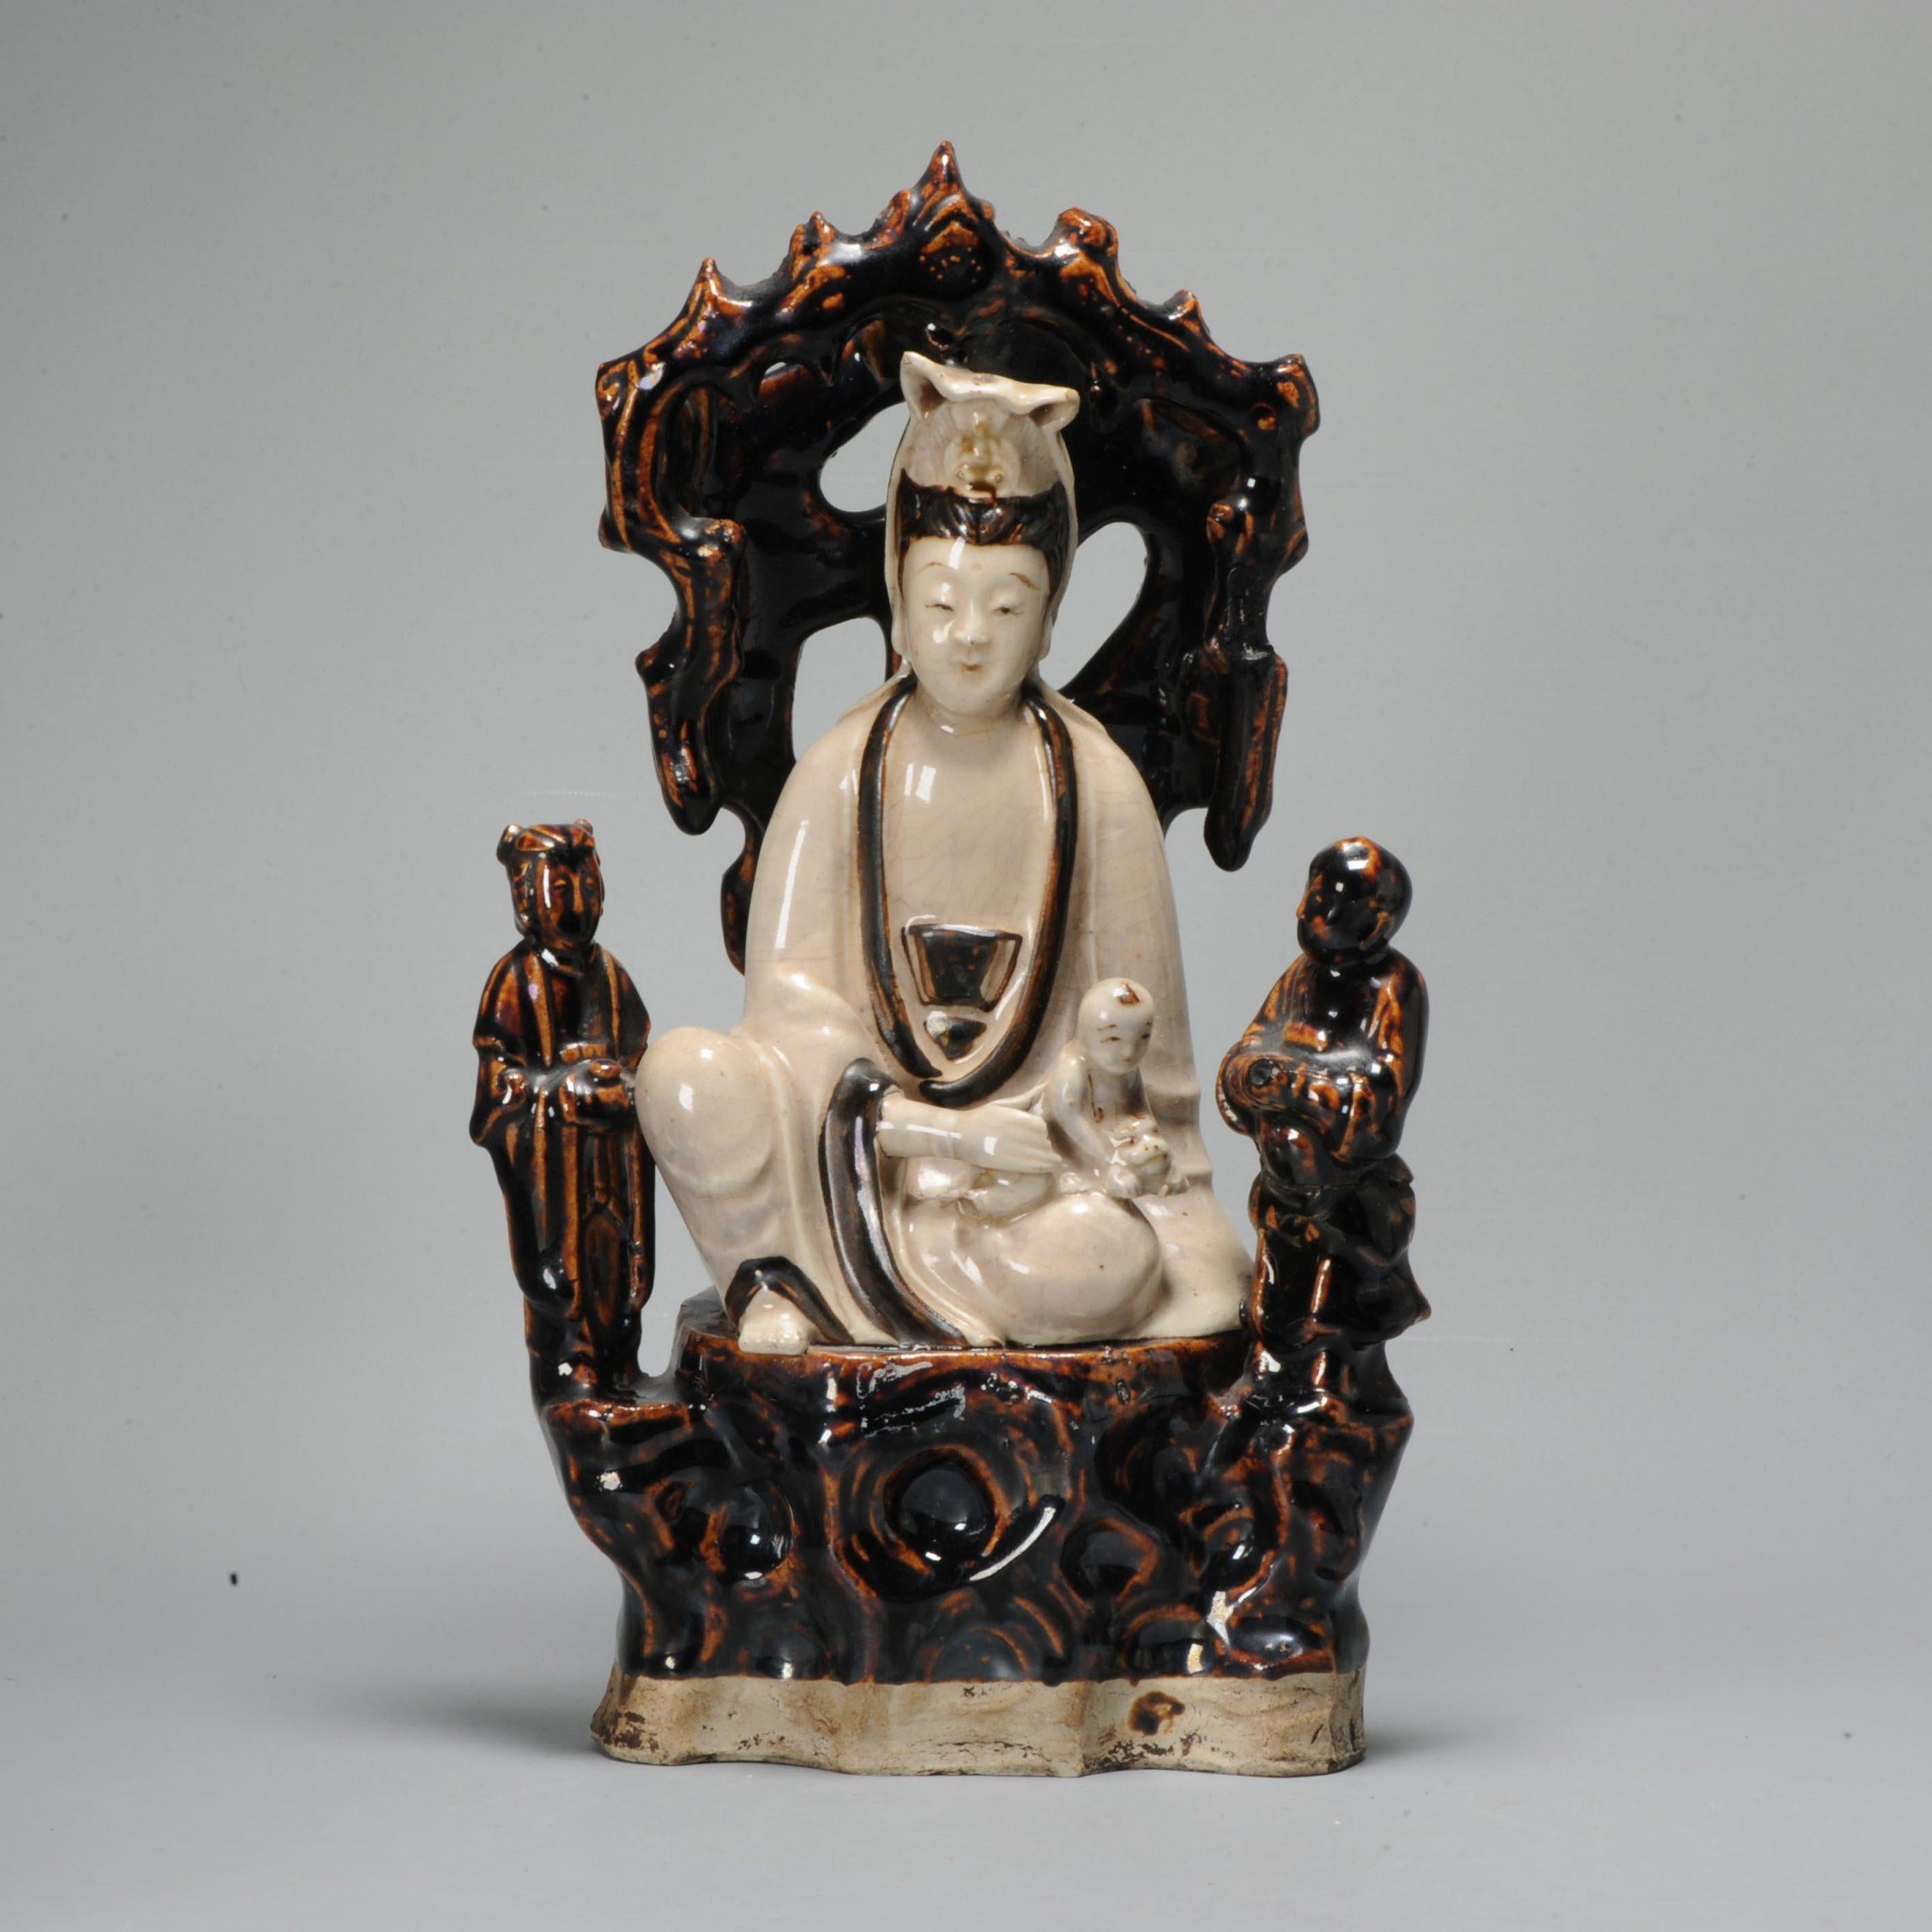 Chinese statue representing Kwan Yin/ Guanyin seated in rajalilasana on a throne, holding a child on her knees, two servants on either side. Cizhou porcelain with cream and brown glazes. Ming Dynasty (1368-1644)


Condition
The right brown